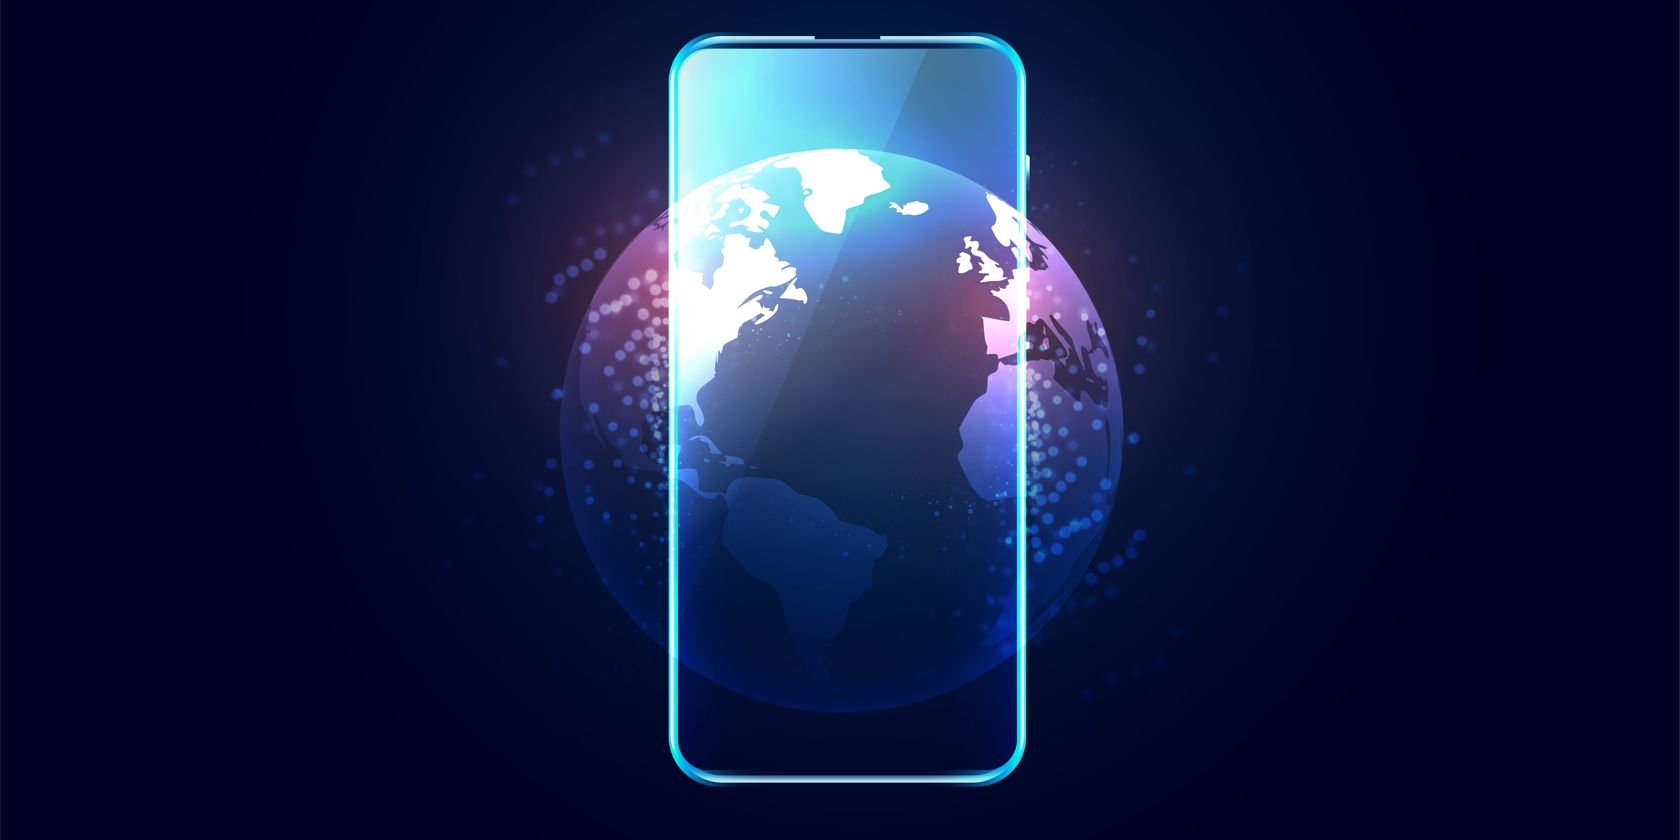 A mobile phone in front of the globe